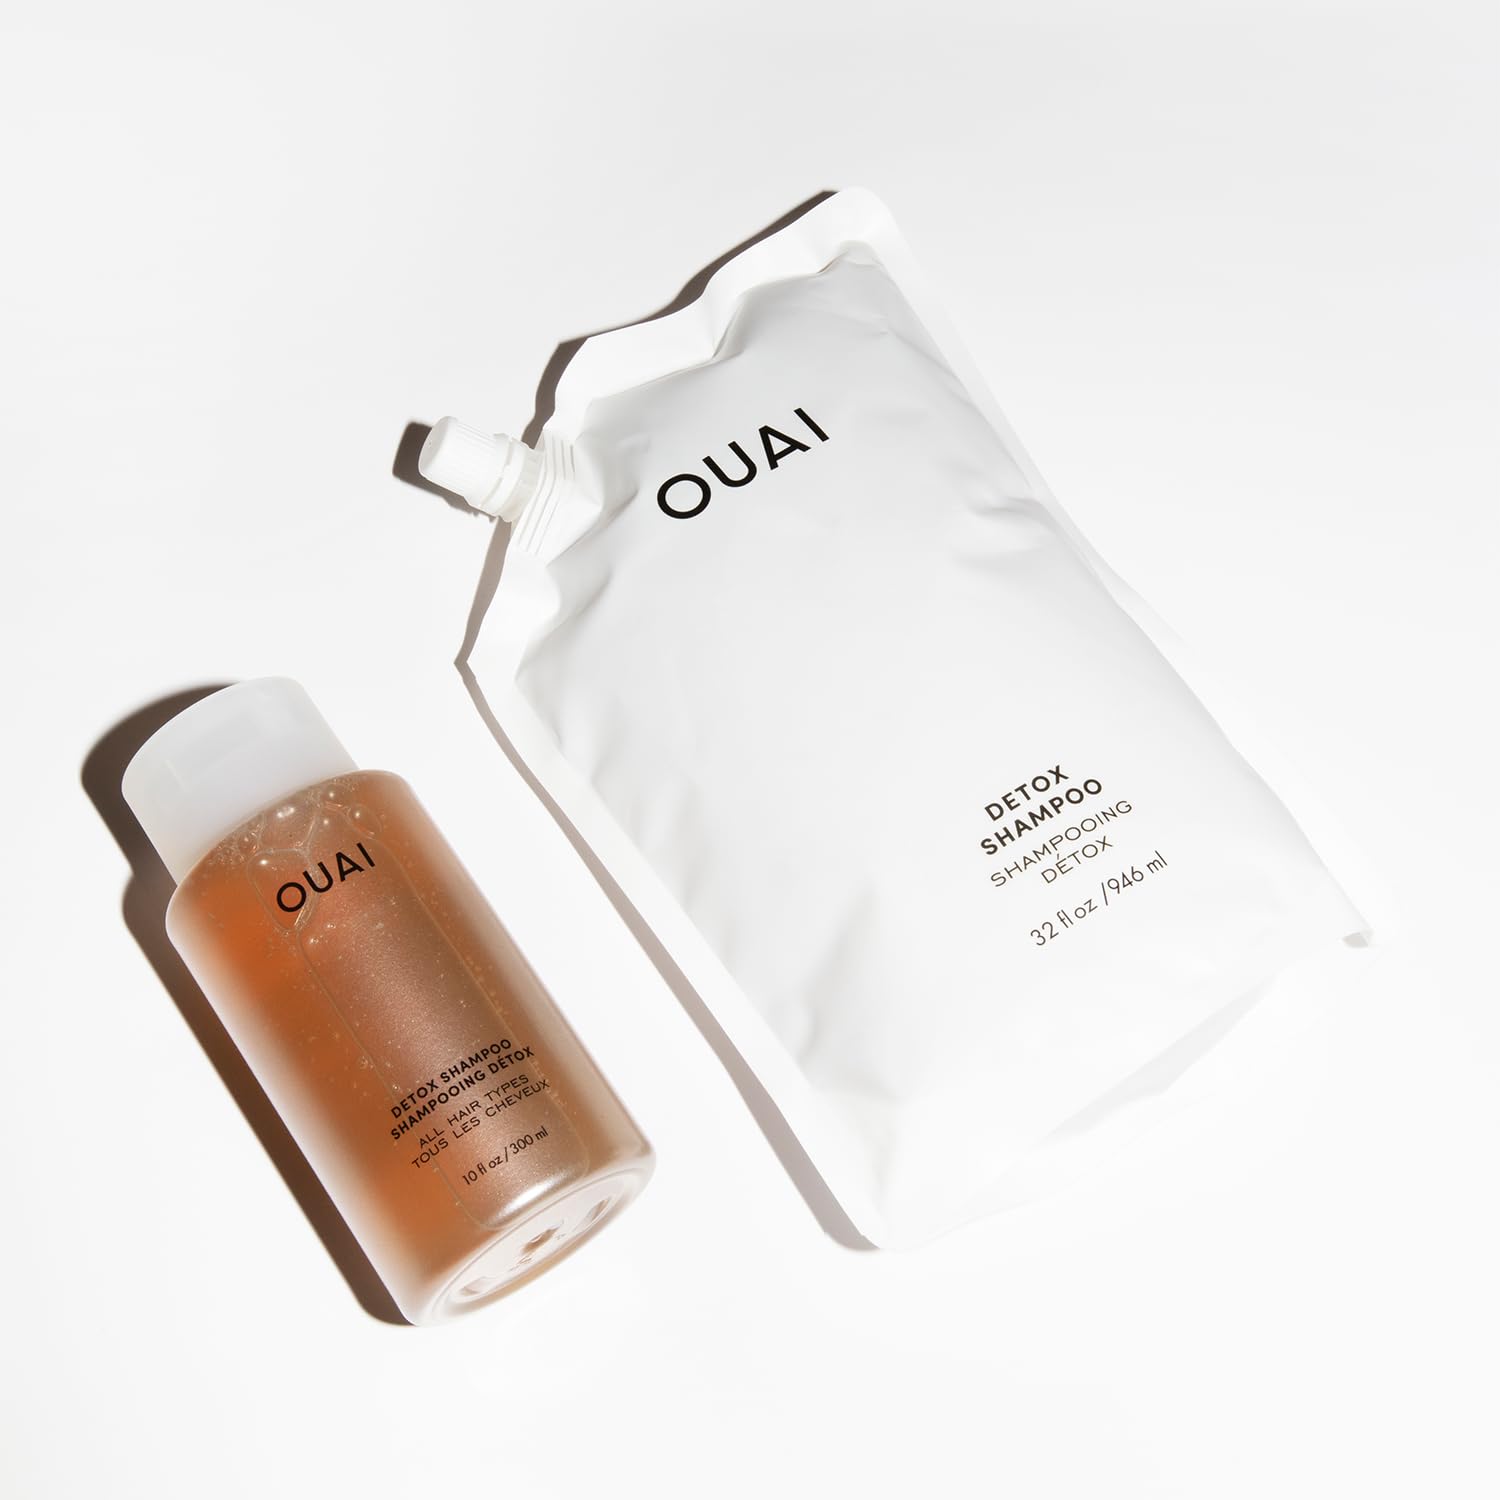 OUAI Detox Shampoo Travel Size - Clarifying Shampoo for Build Up, Dirt, Oil, Product and Hard Water - Apple Cider Vinegar & Keratin for Clean, Refreshed Hair - Sulfate-Free Hair Care (3 oz) : Beauty & Personal Care